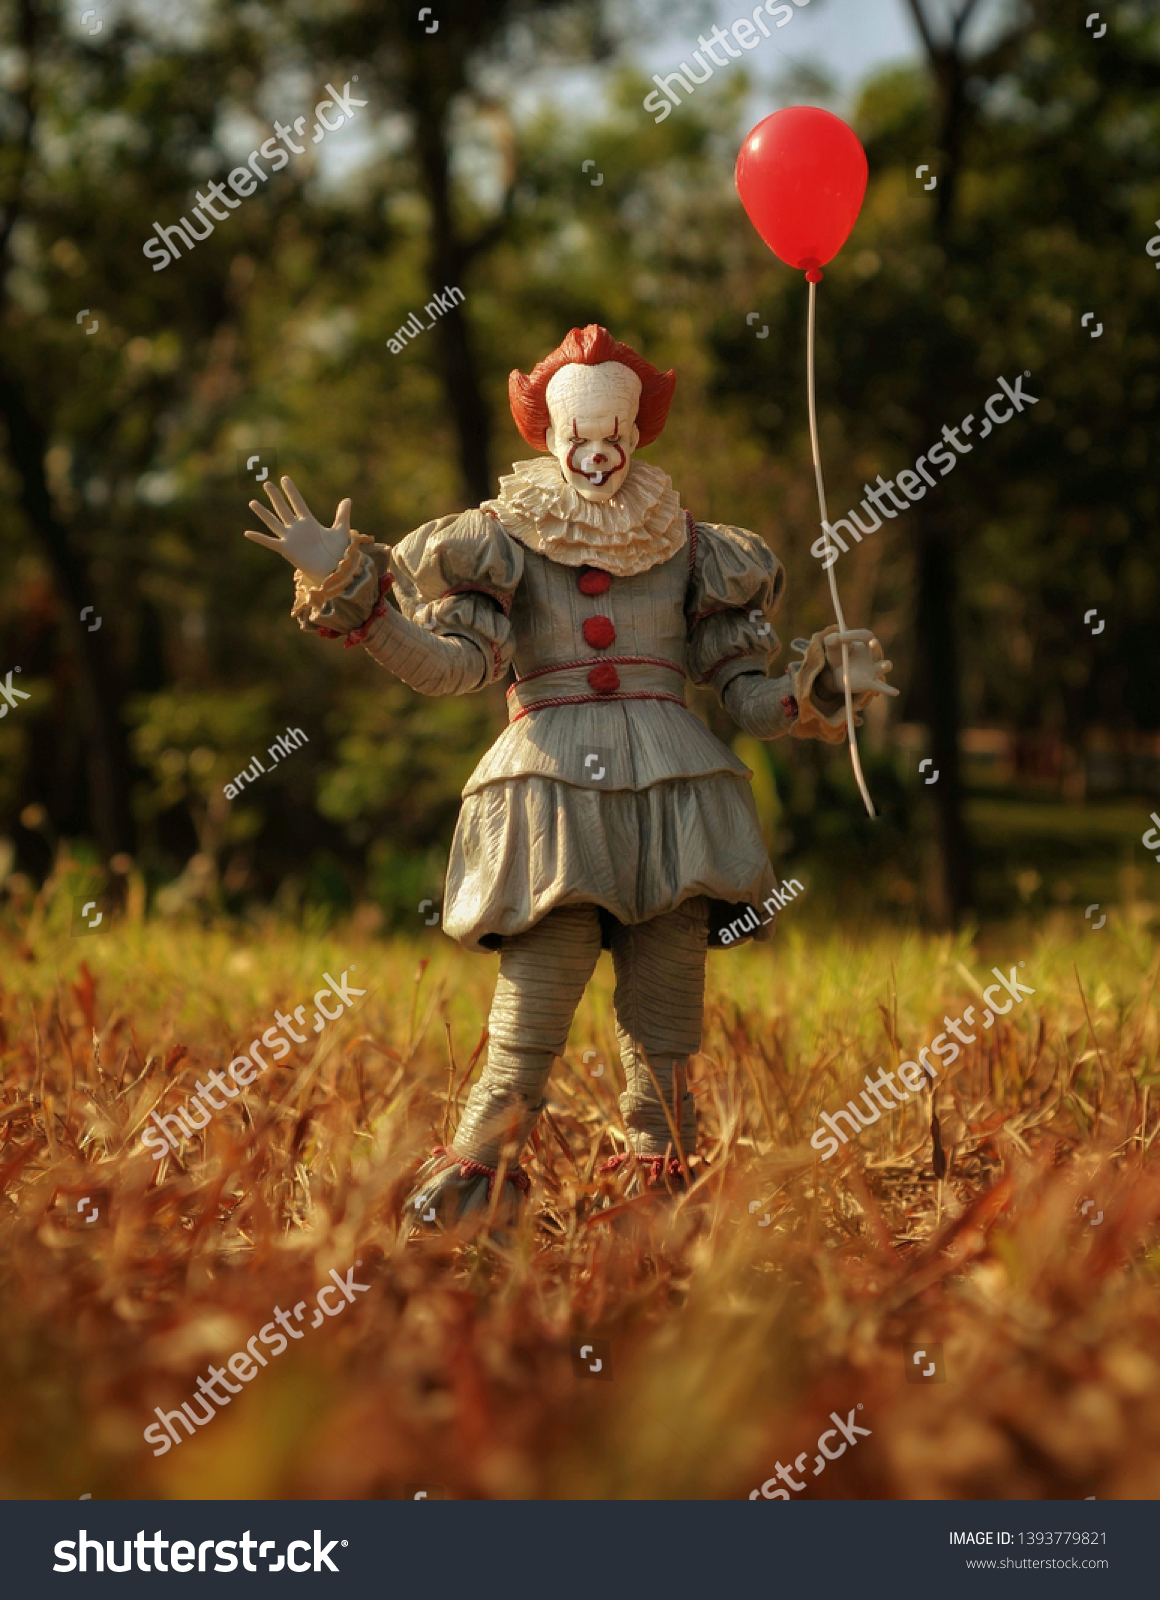 Central Java Indonesia May 10 2019 Parks Outdoor Stock Image 1393779821 - creepy pennywise dancing music roblox code